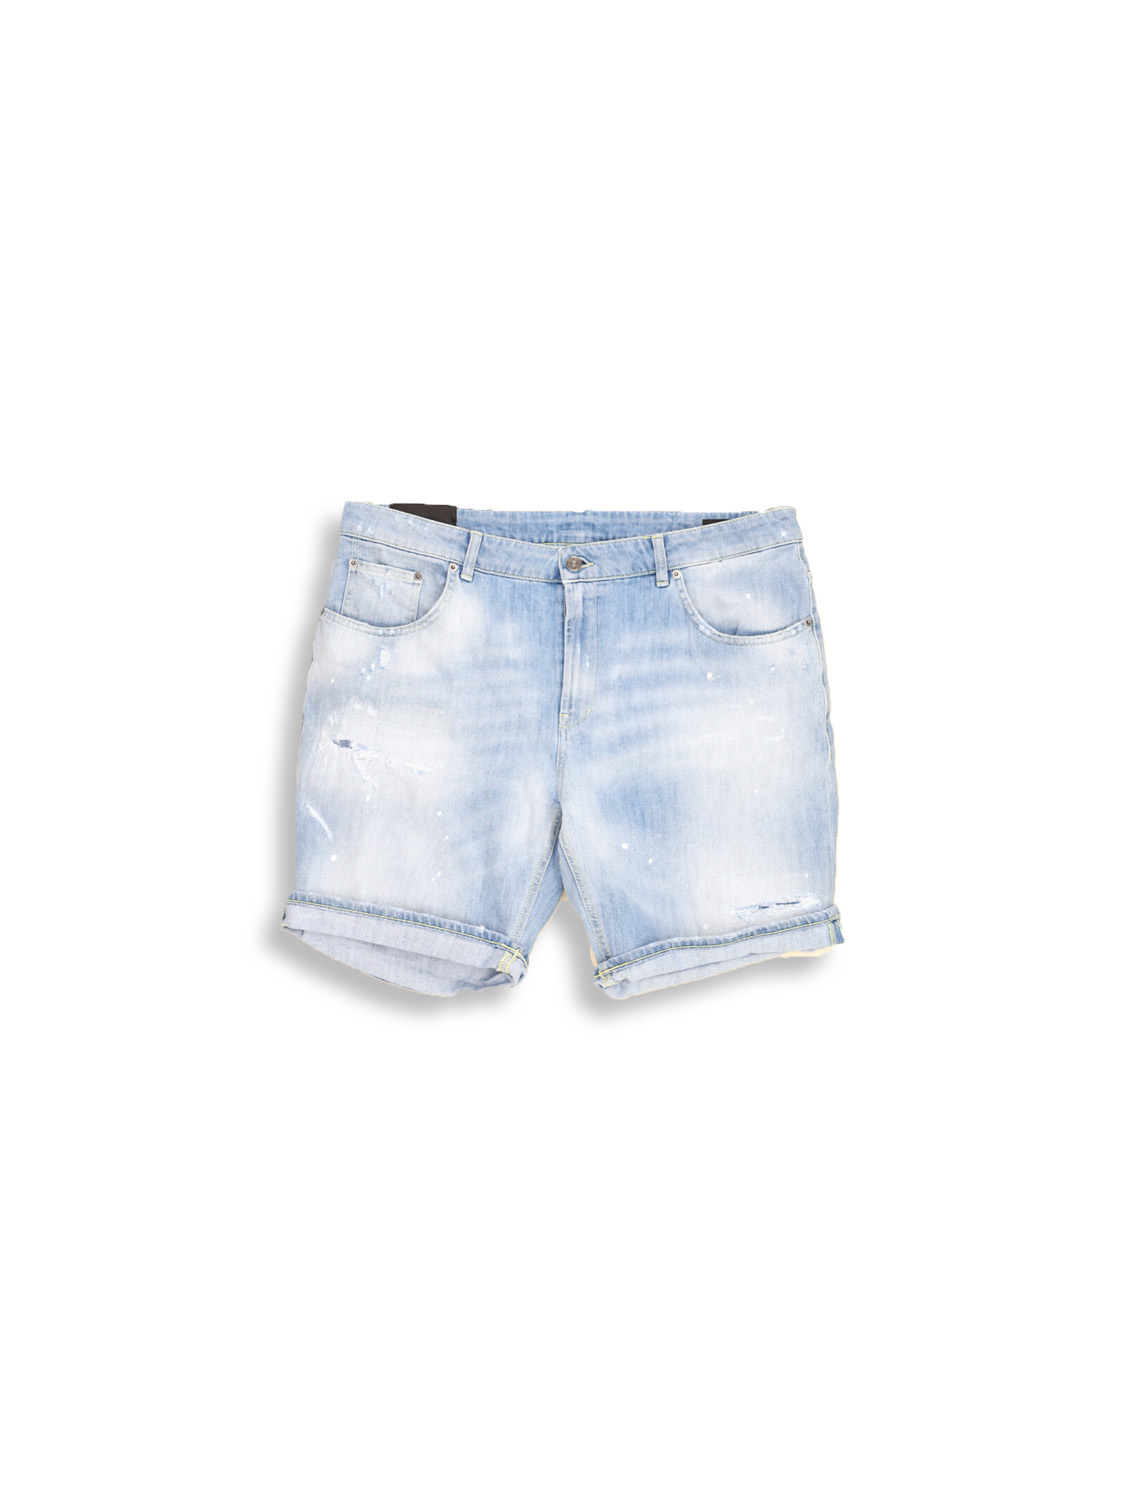 Destroyed denim shorts with a bright wash